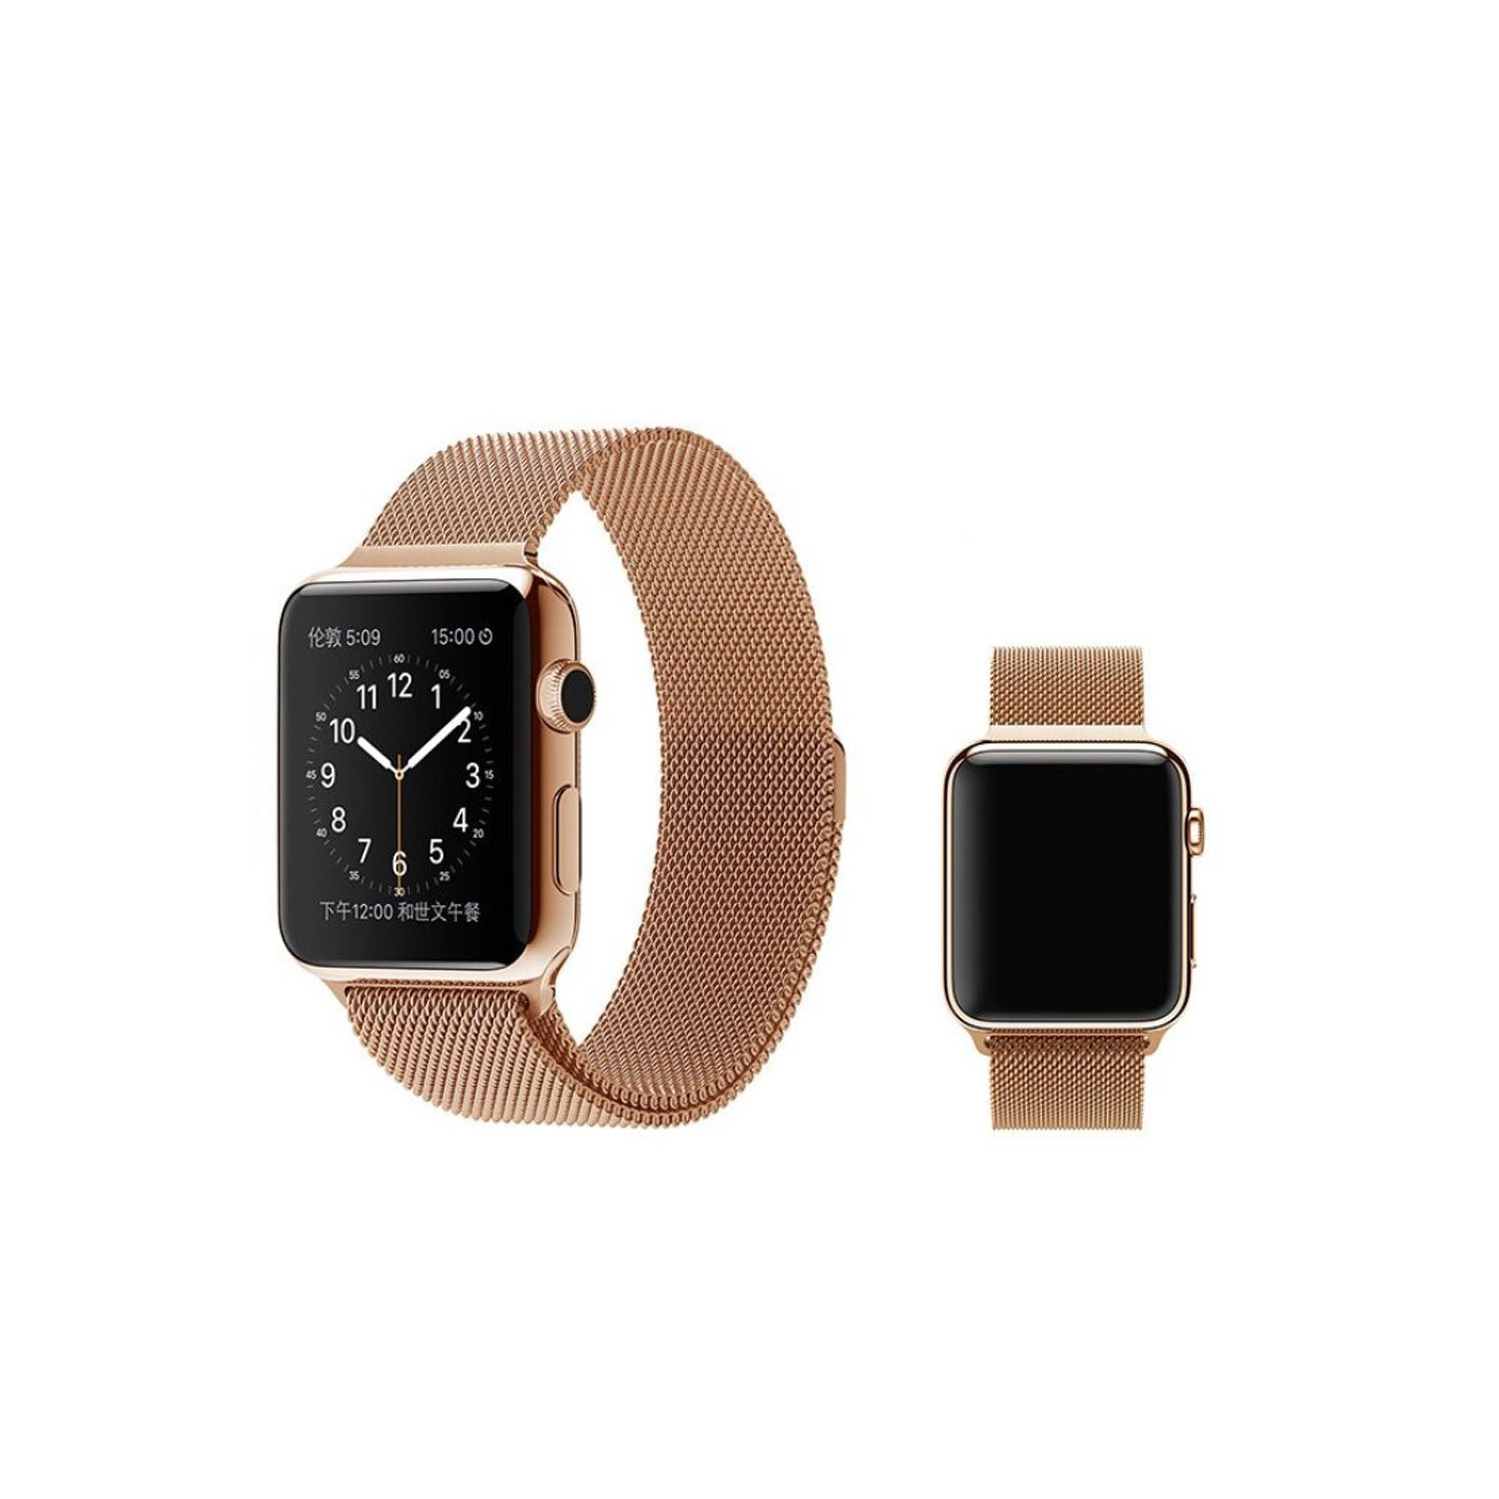 Modern Milanese Magnetic Closure iWatch Band Bracelet Strap Loop for Apple Watch Sport Edition Series 1/2/3/4/5/6/7/8/9 42mm,44mm,45mm - Rose Gold